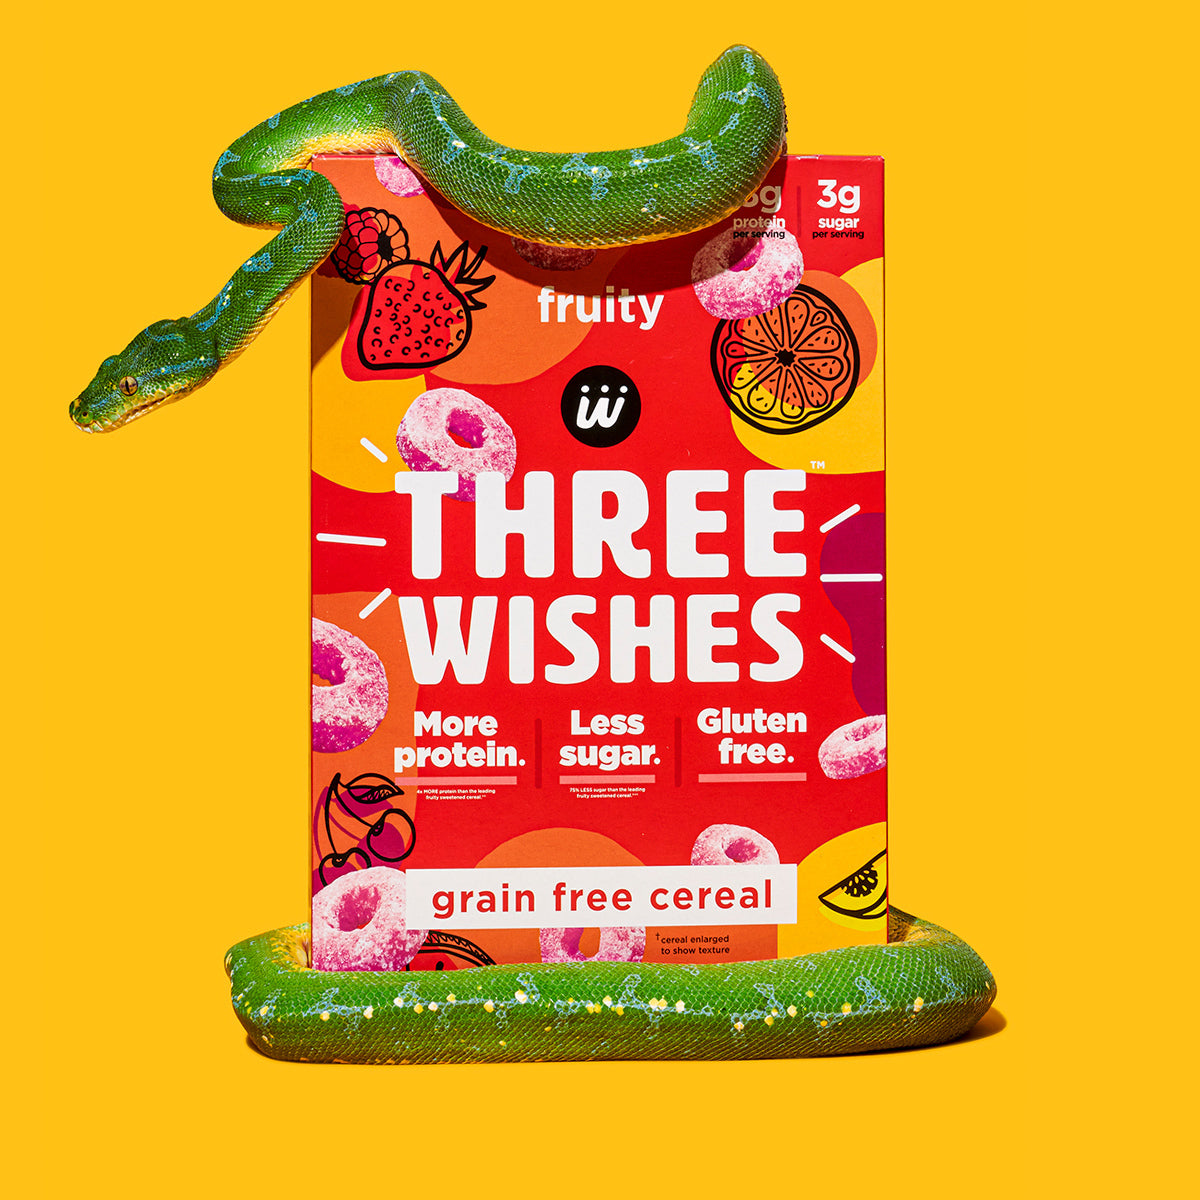 The fruity cereal by Three Wishes Cereal against a yellow background and wrapped by a stuffed animal snake. 